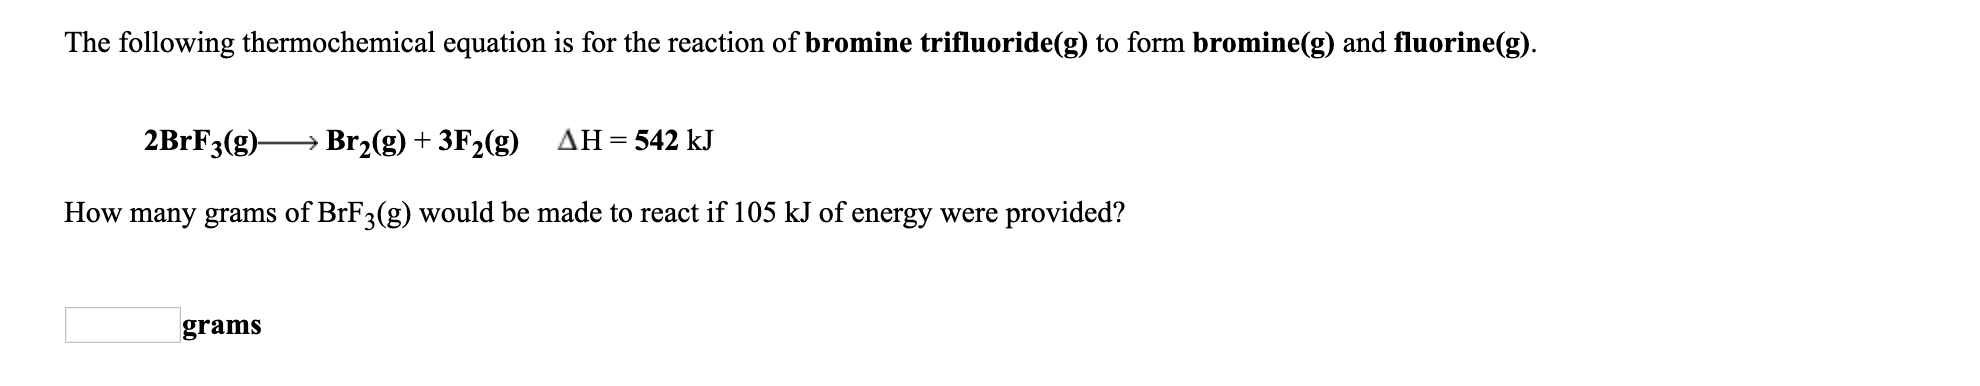 The following thermochemical equation is for the reaction of bromine trifluoride(g) to form bromine(g) and fluorine(g).
2BRF3(g)-
Br2(g) + 3F2(g) AH=542 kJ
How many grams of BrF3(g) would be made to react if 105 kJ of energy were provided?
grams
